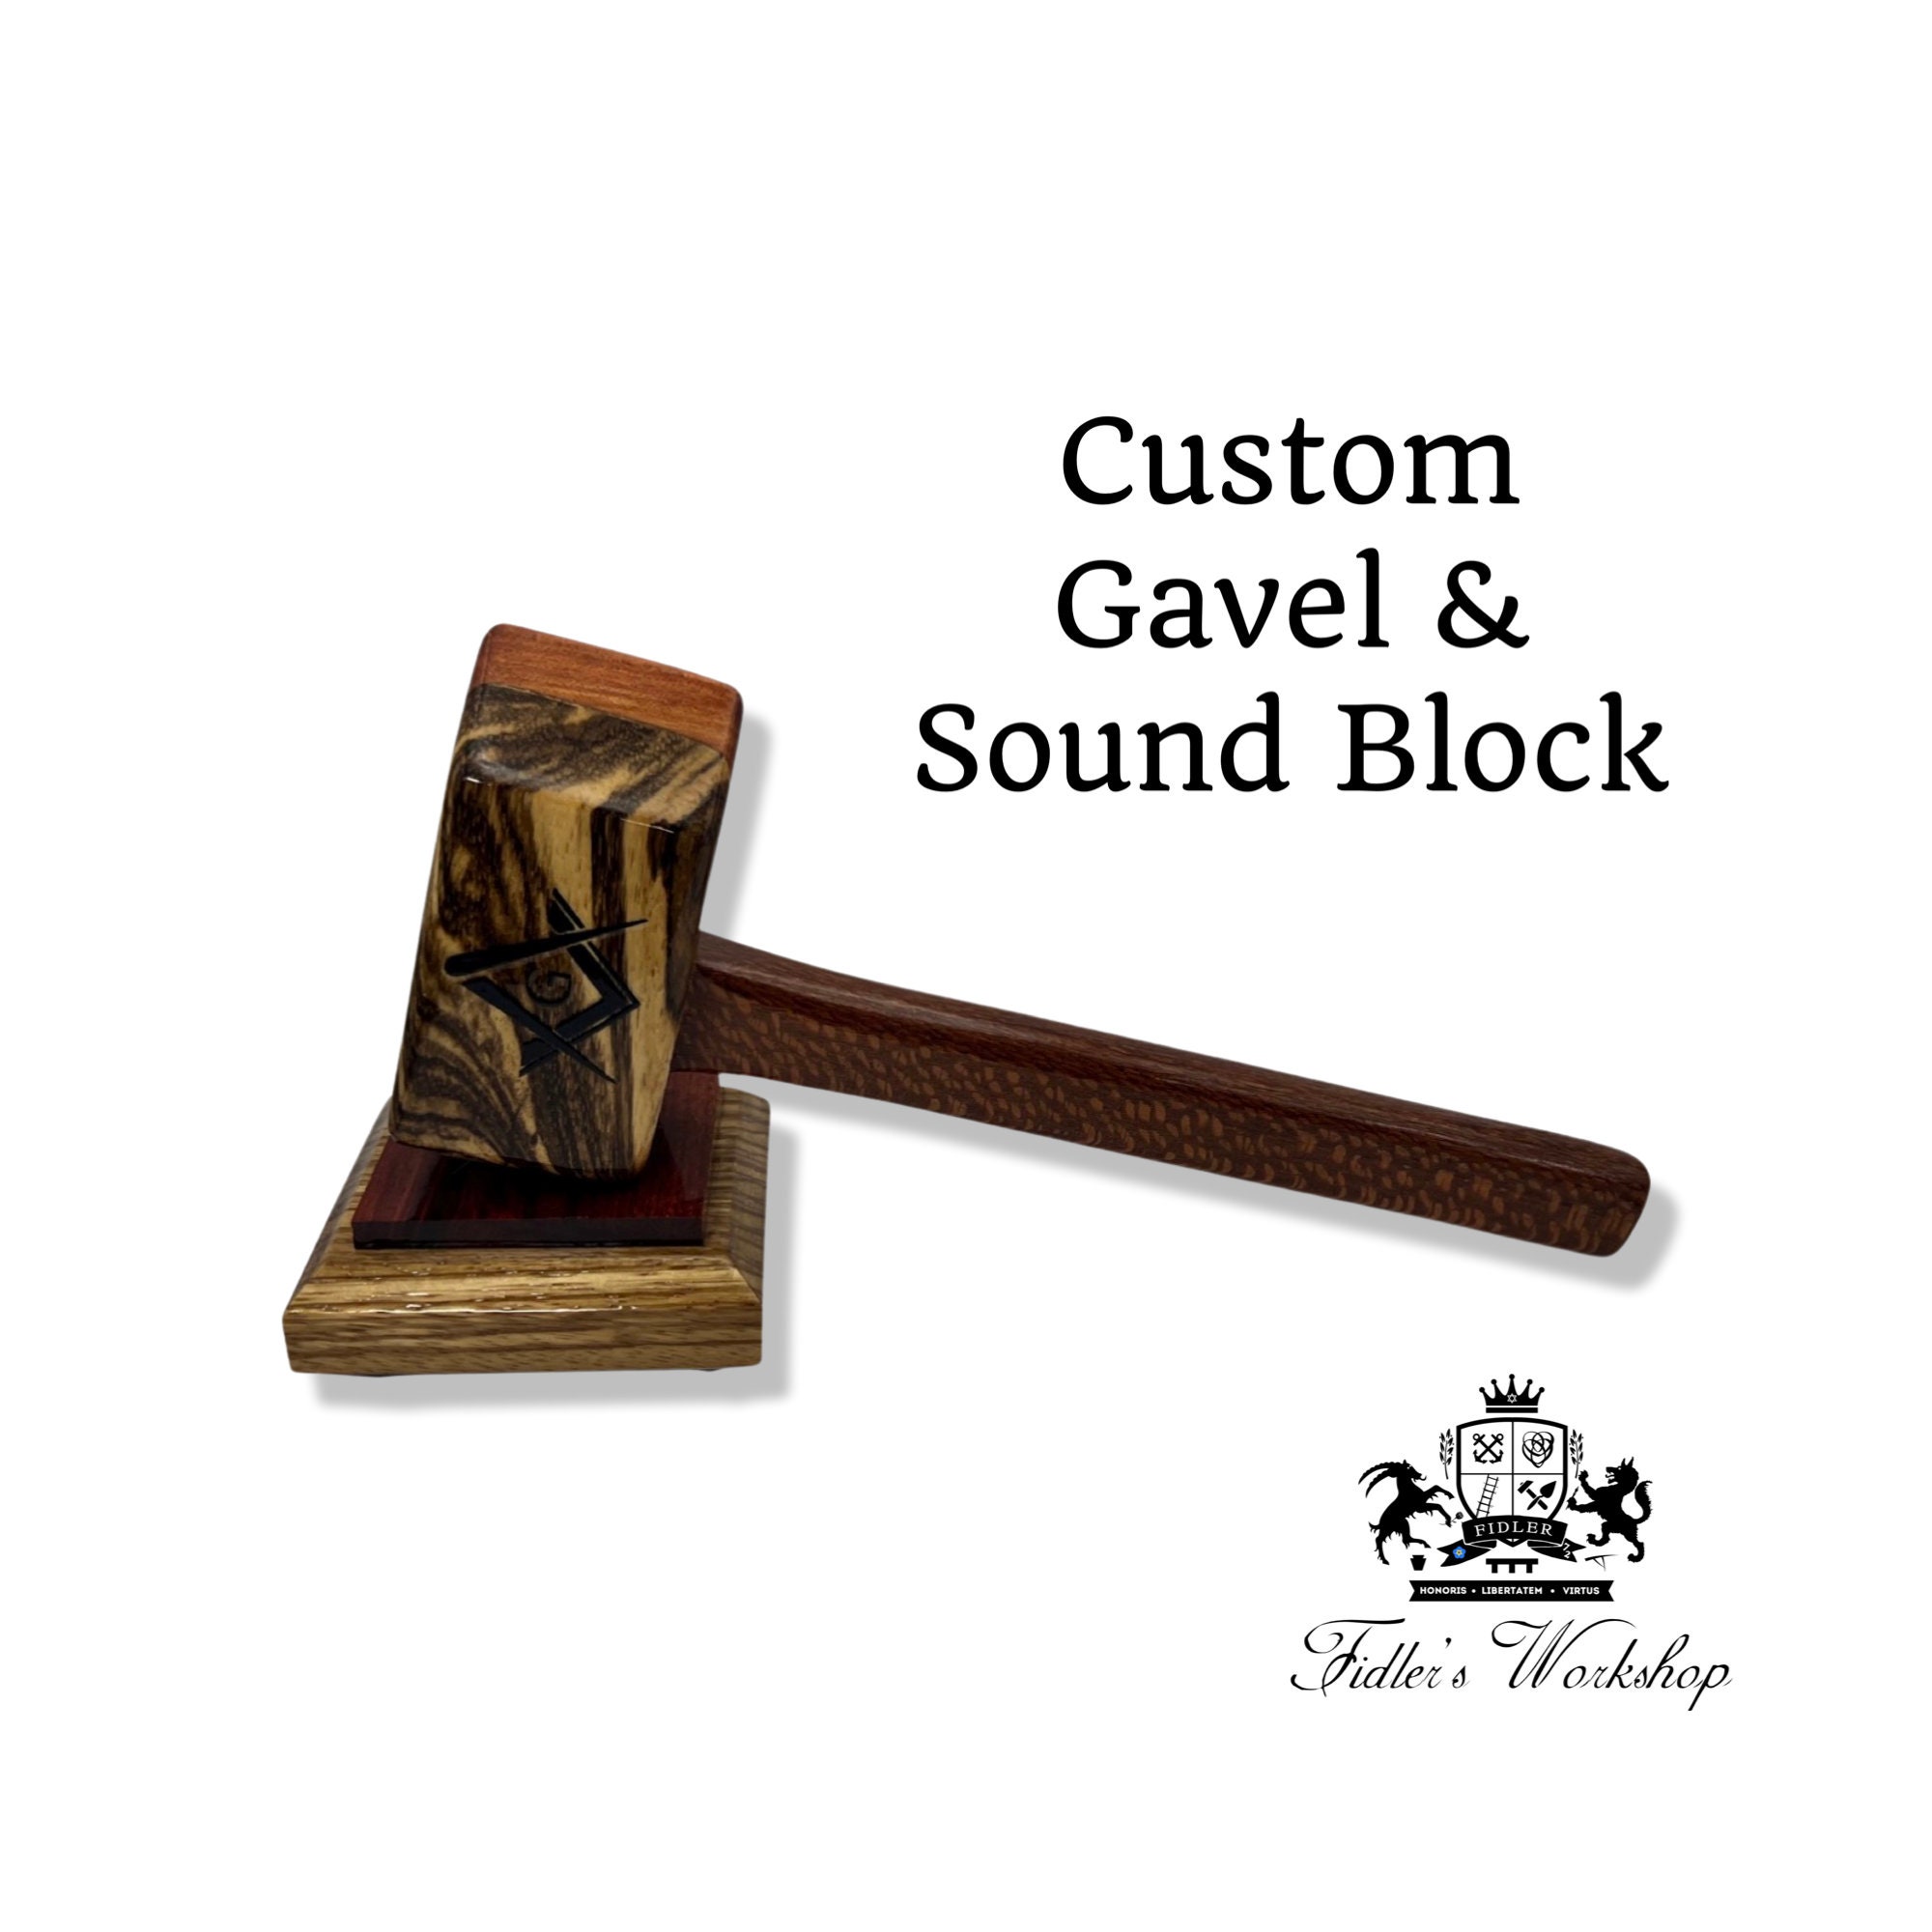 Wooden Gavel and Sound Round Block Best Gift Idea Gavels Set Handcrafted Natural Wood Finish Perfect for Judge MoonWood Gavel & Block Set Lawyer Student Auction Gavels 